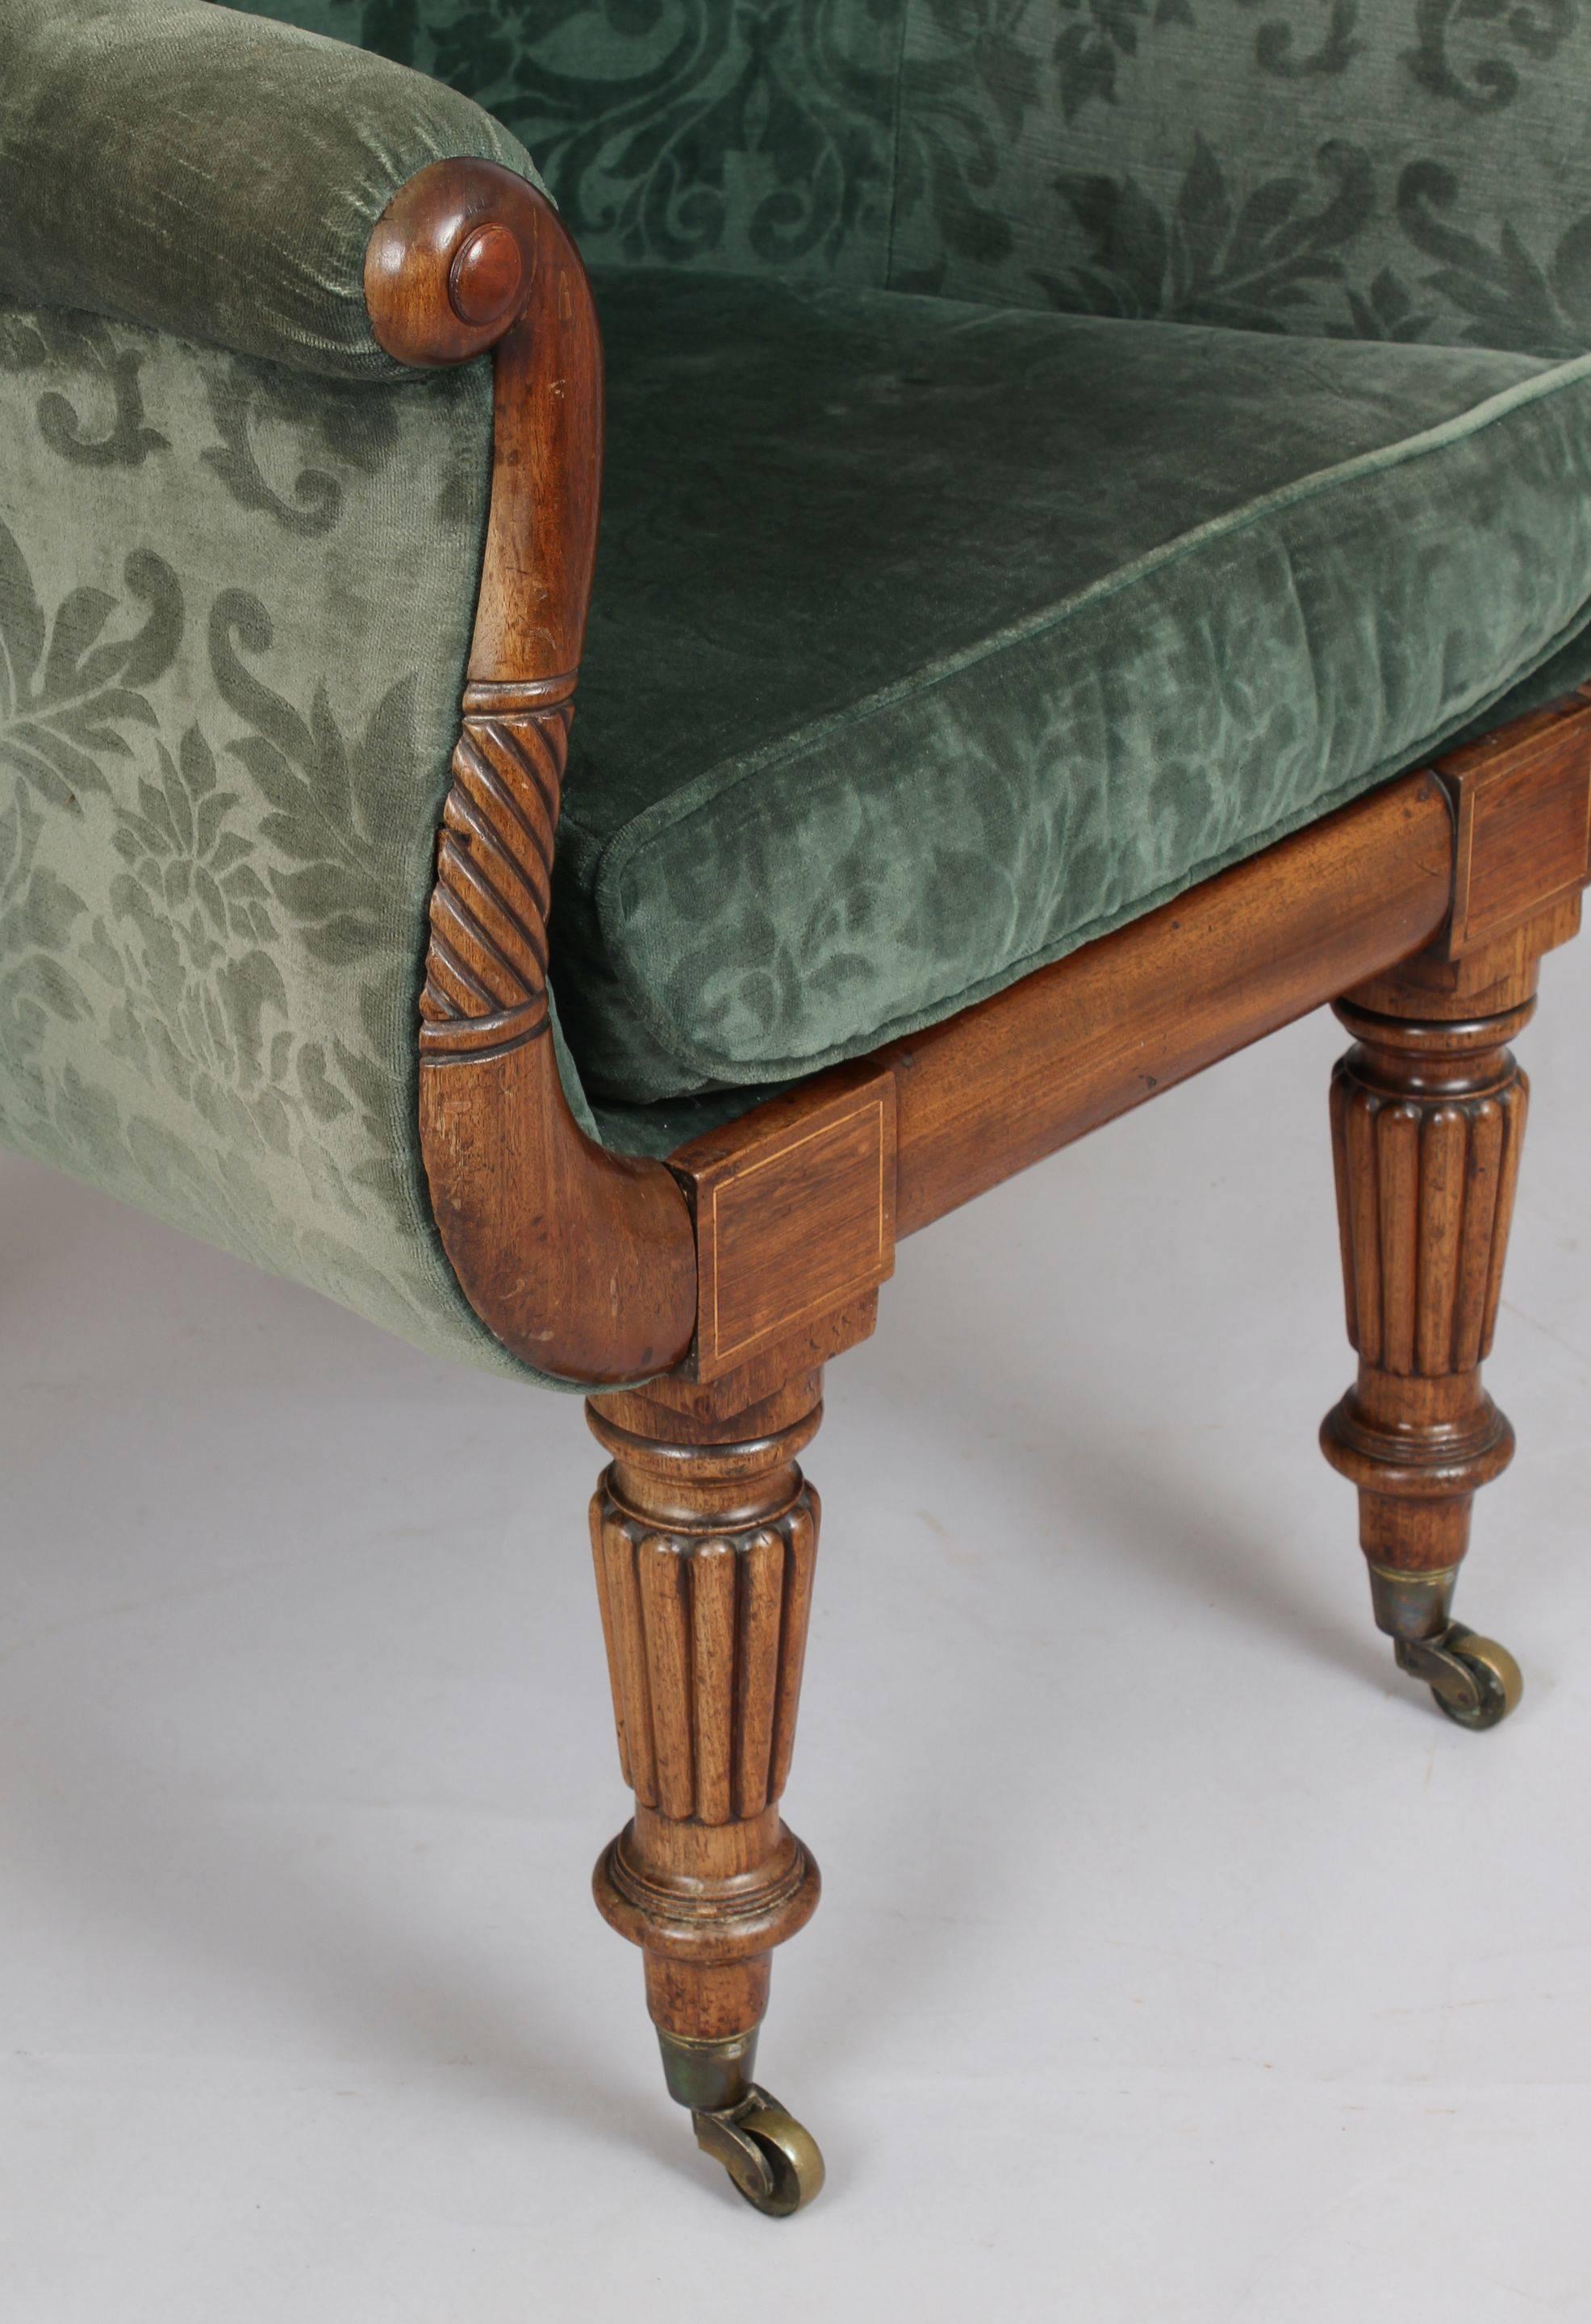 English William IV Period Tall-Backed Easy-Chair For Sale